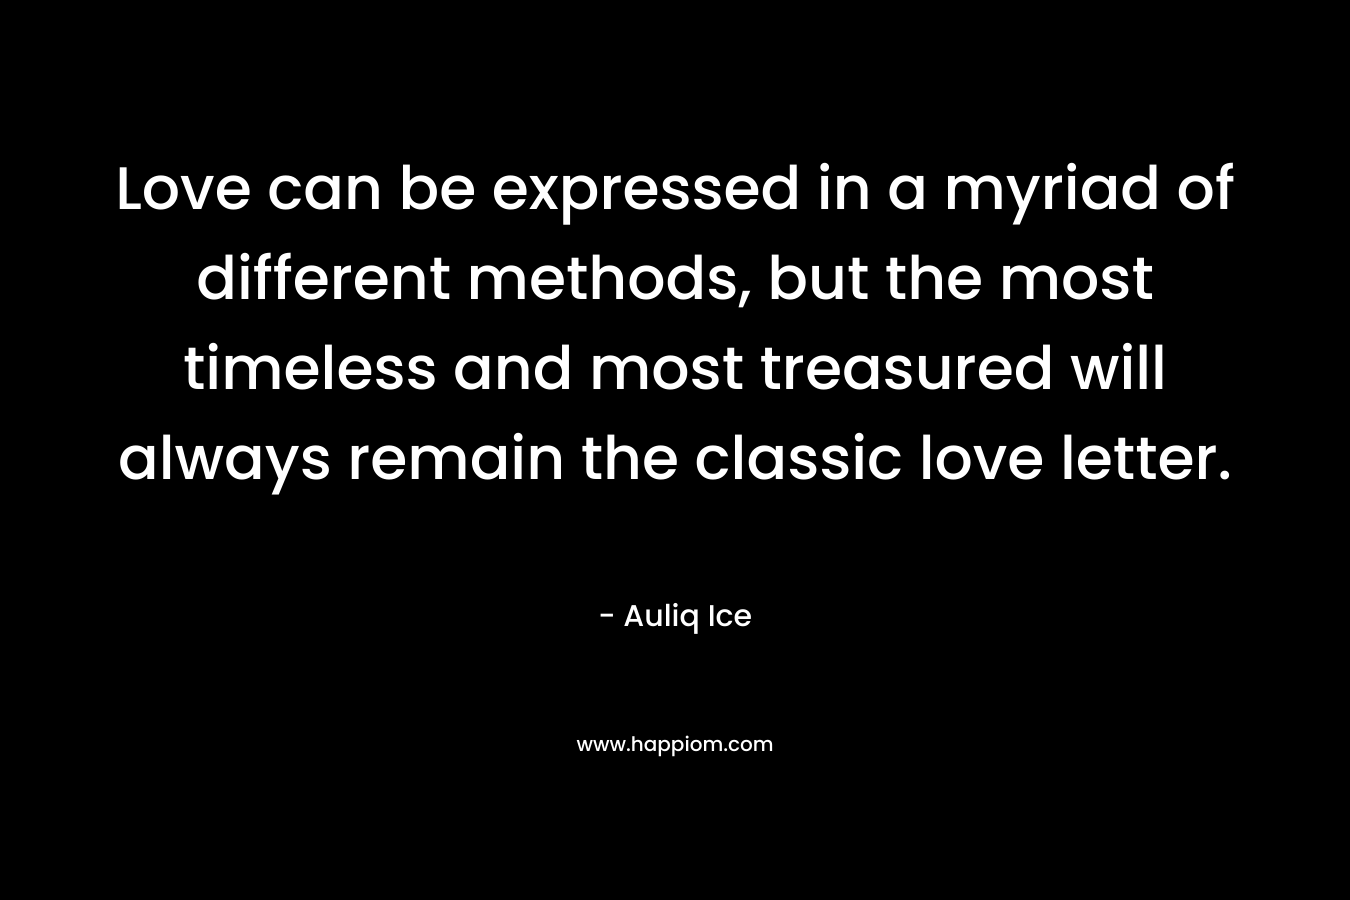 Love can be expressed in a myriad of different methods, but the most timeless and most treasured will always remain the classic love letter.